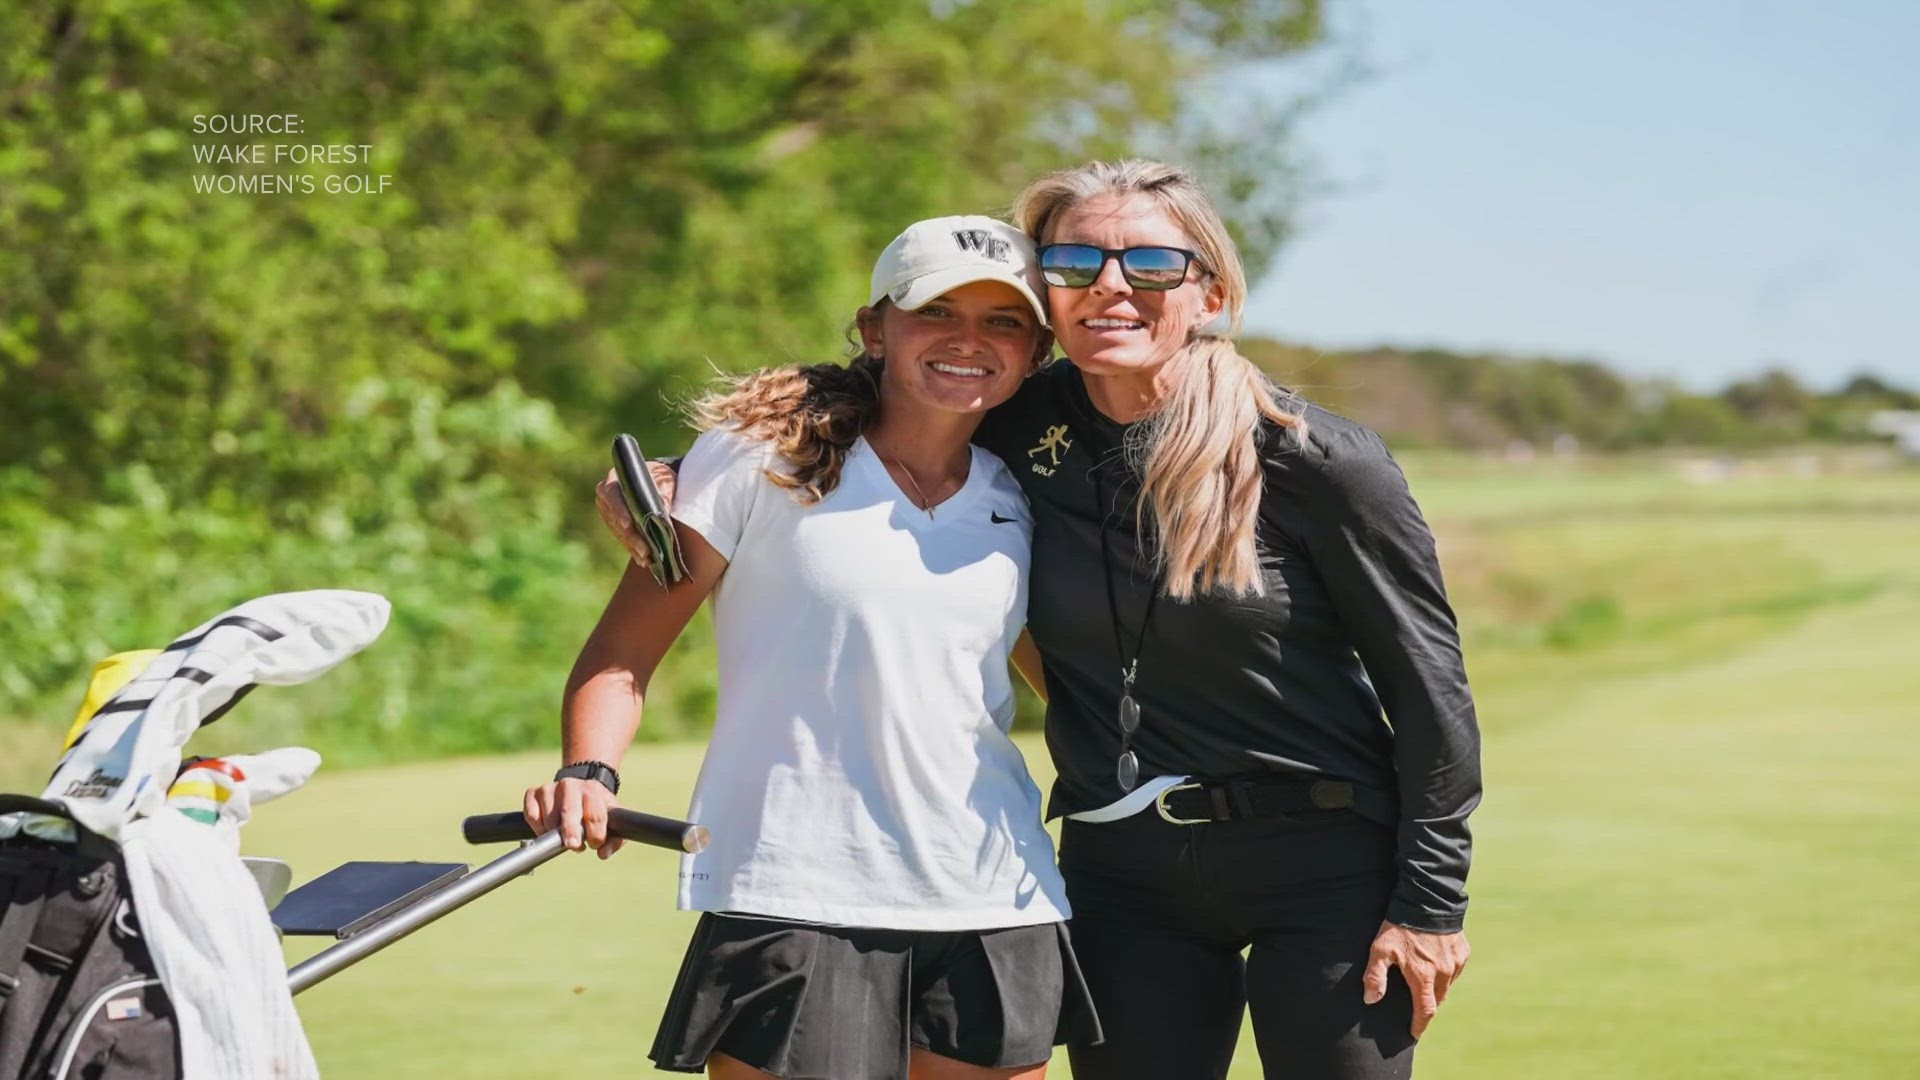 The Demon Deacons have played in four tournaments this fall taking the titles in two of them with Macy Pate playing a big role in both victories.